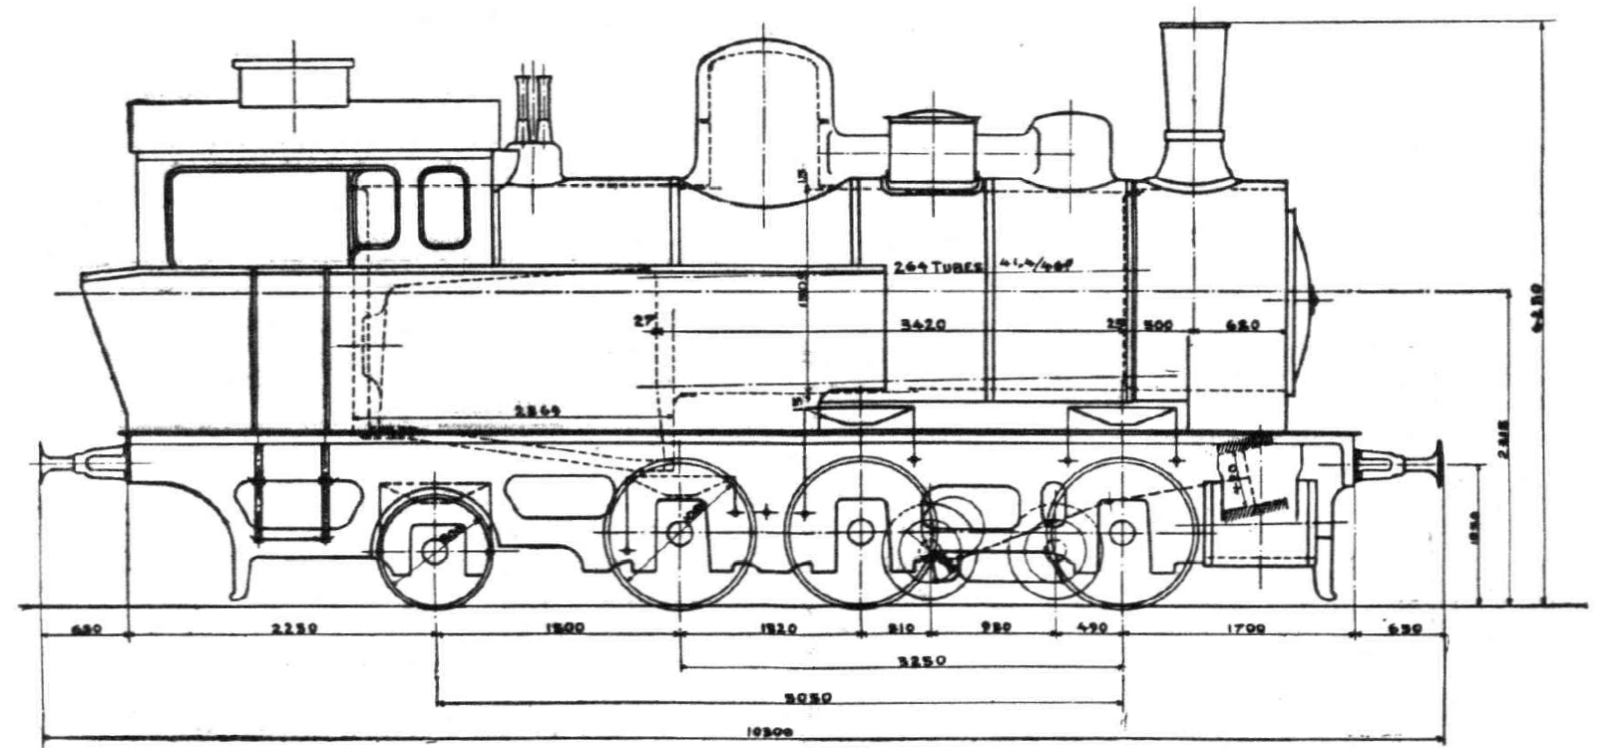 Schematic drawing of the Borsig type with dimensions